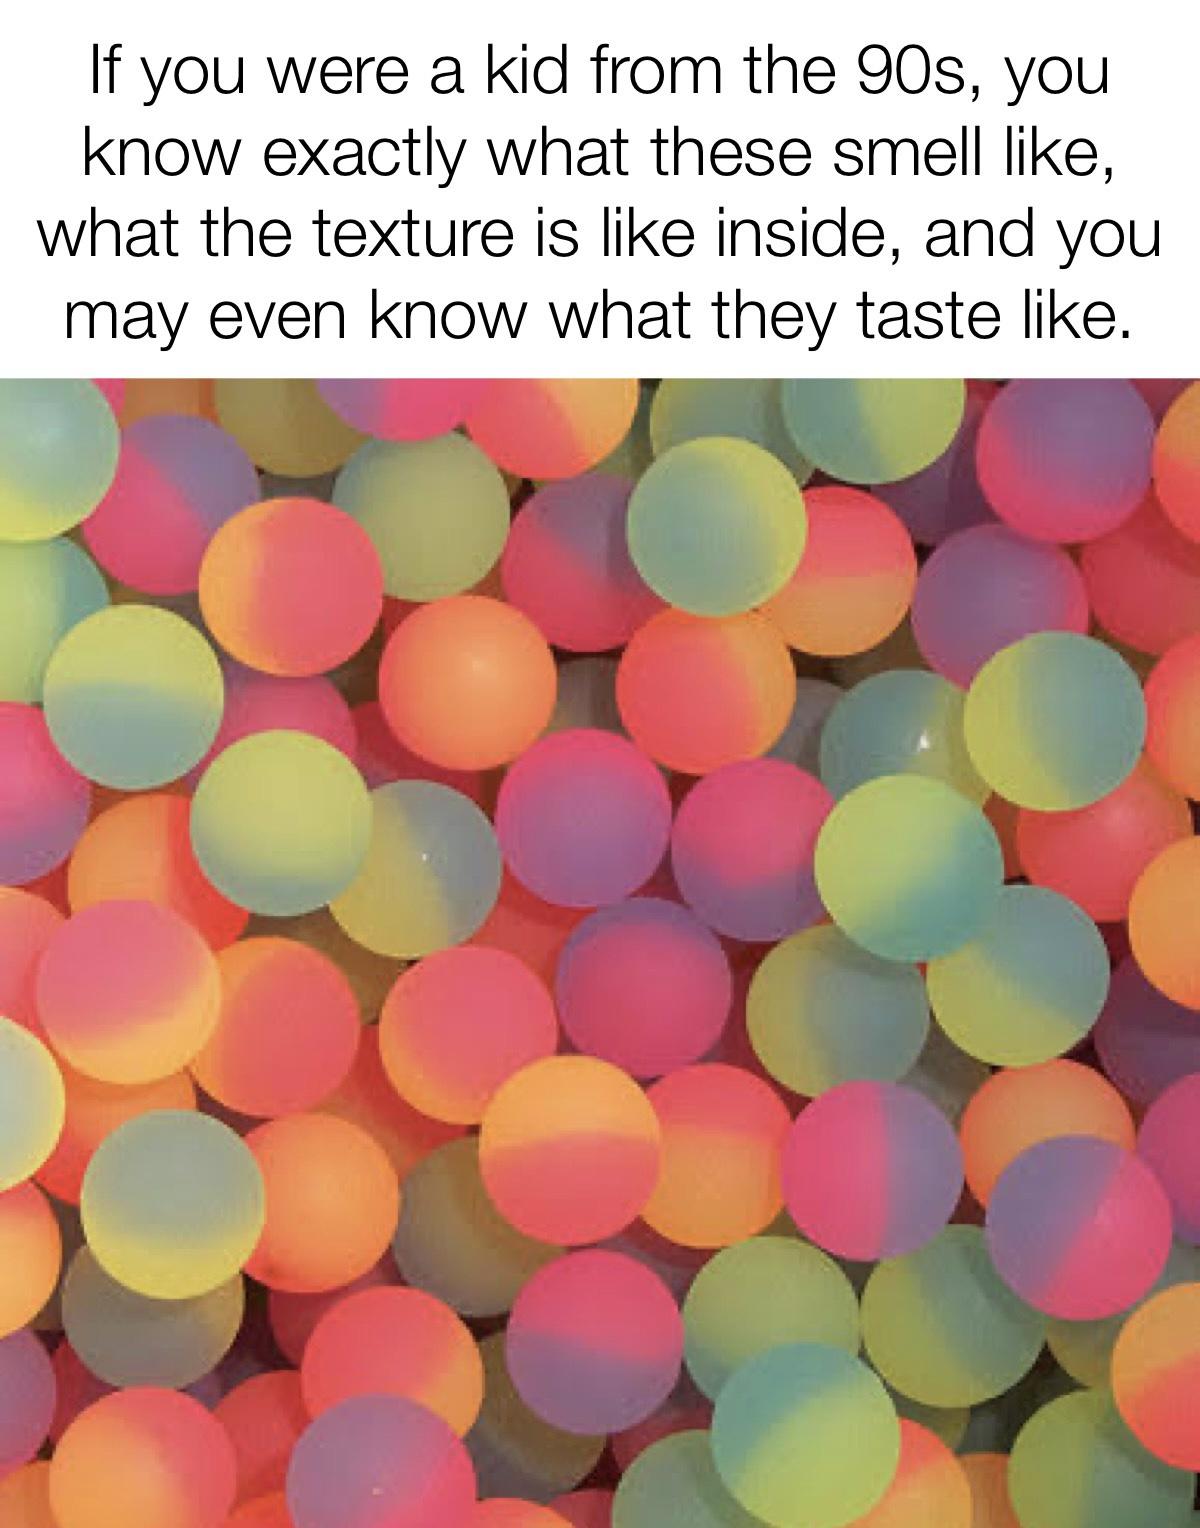 funny memes and pics - icy bouncy balls - If you were a kid from the 90s, you know exactly what these smell , what the texture is inside, and you may even know what they taste .